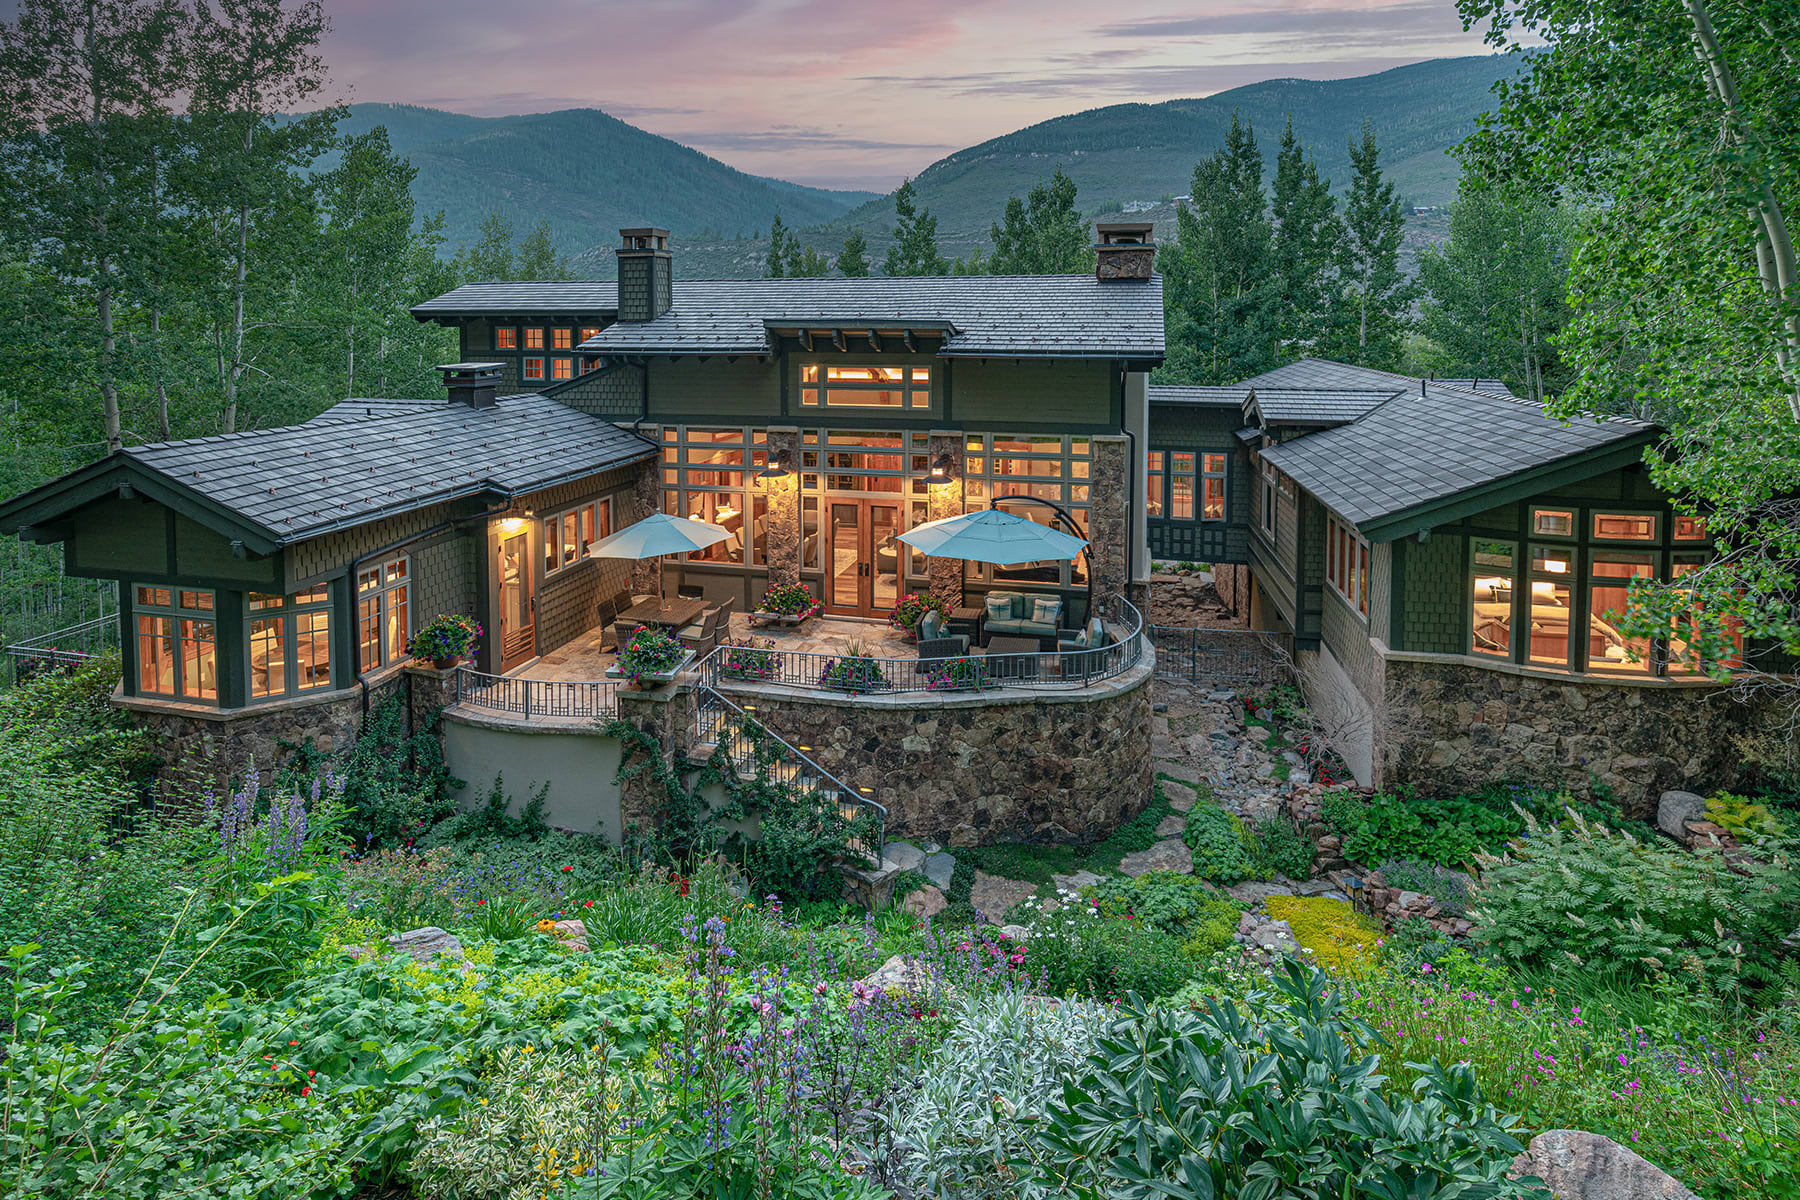 An Architectural Delight with Easy Access to Vail Mountain